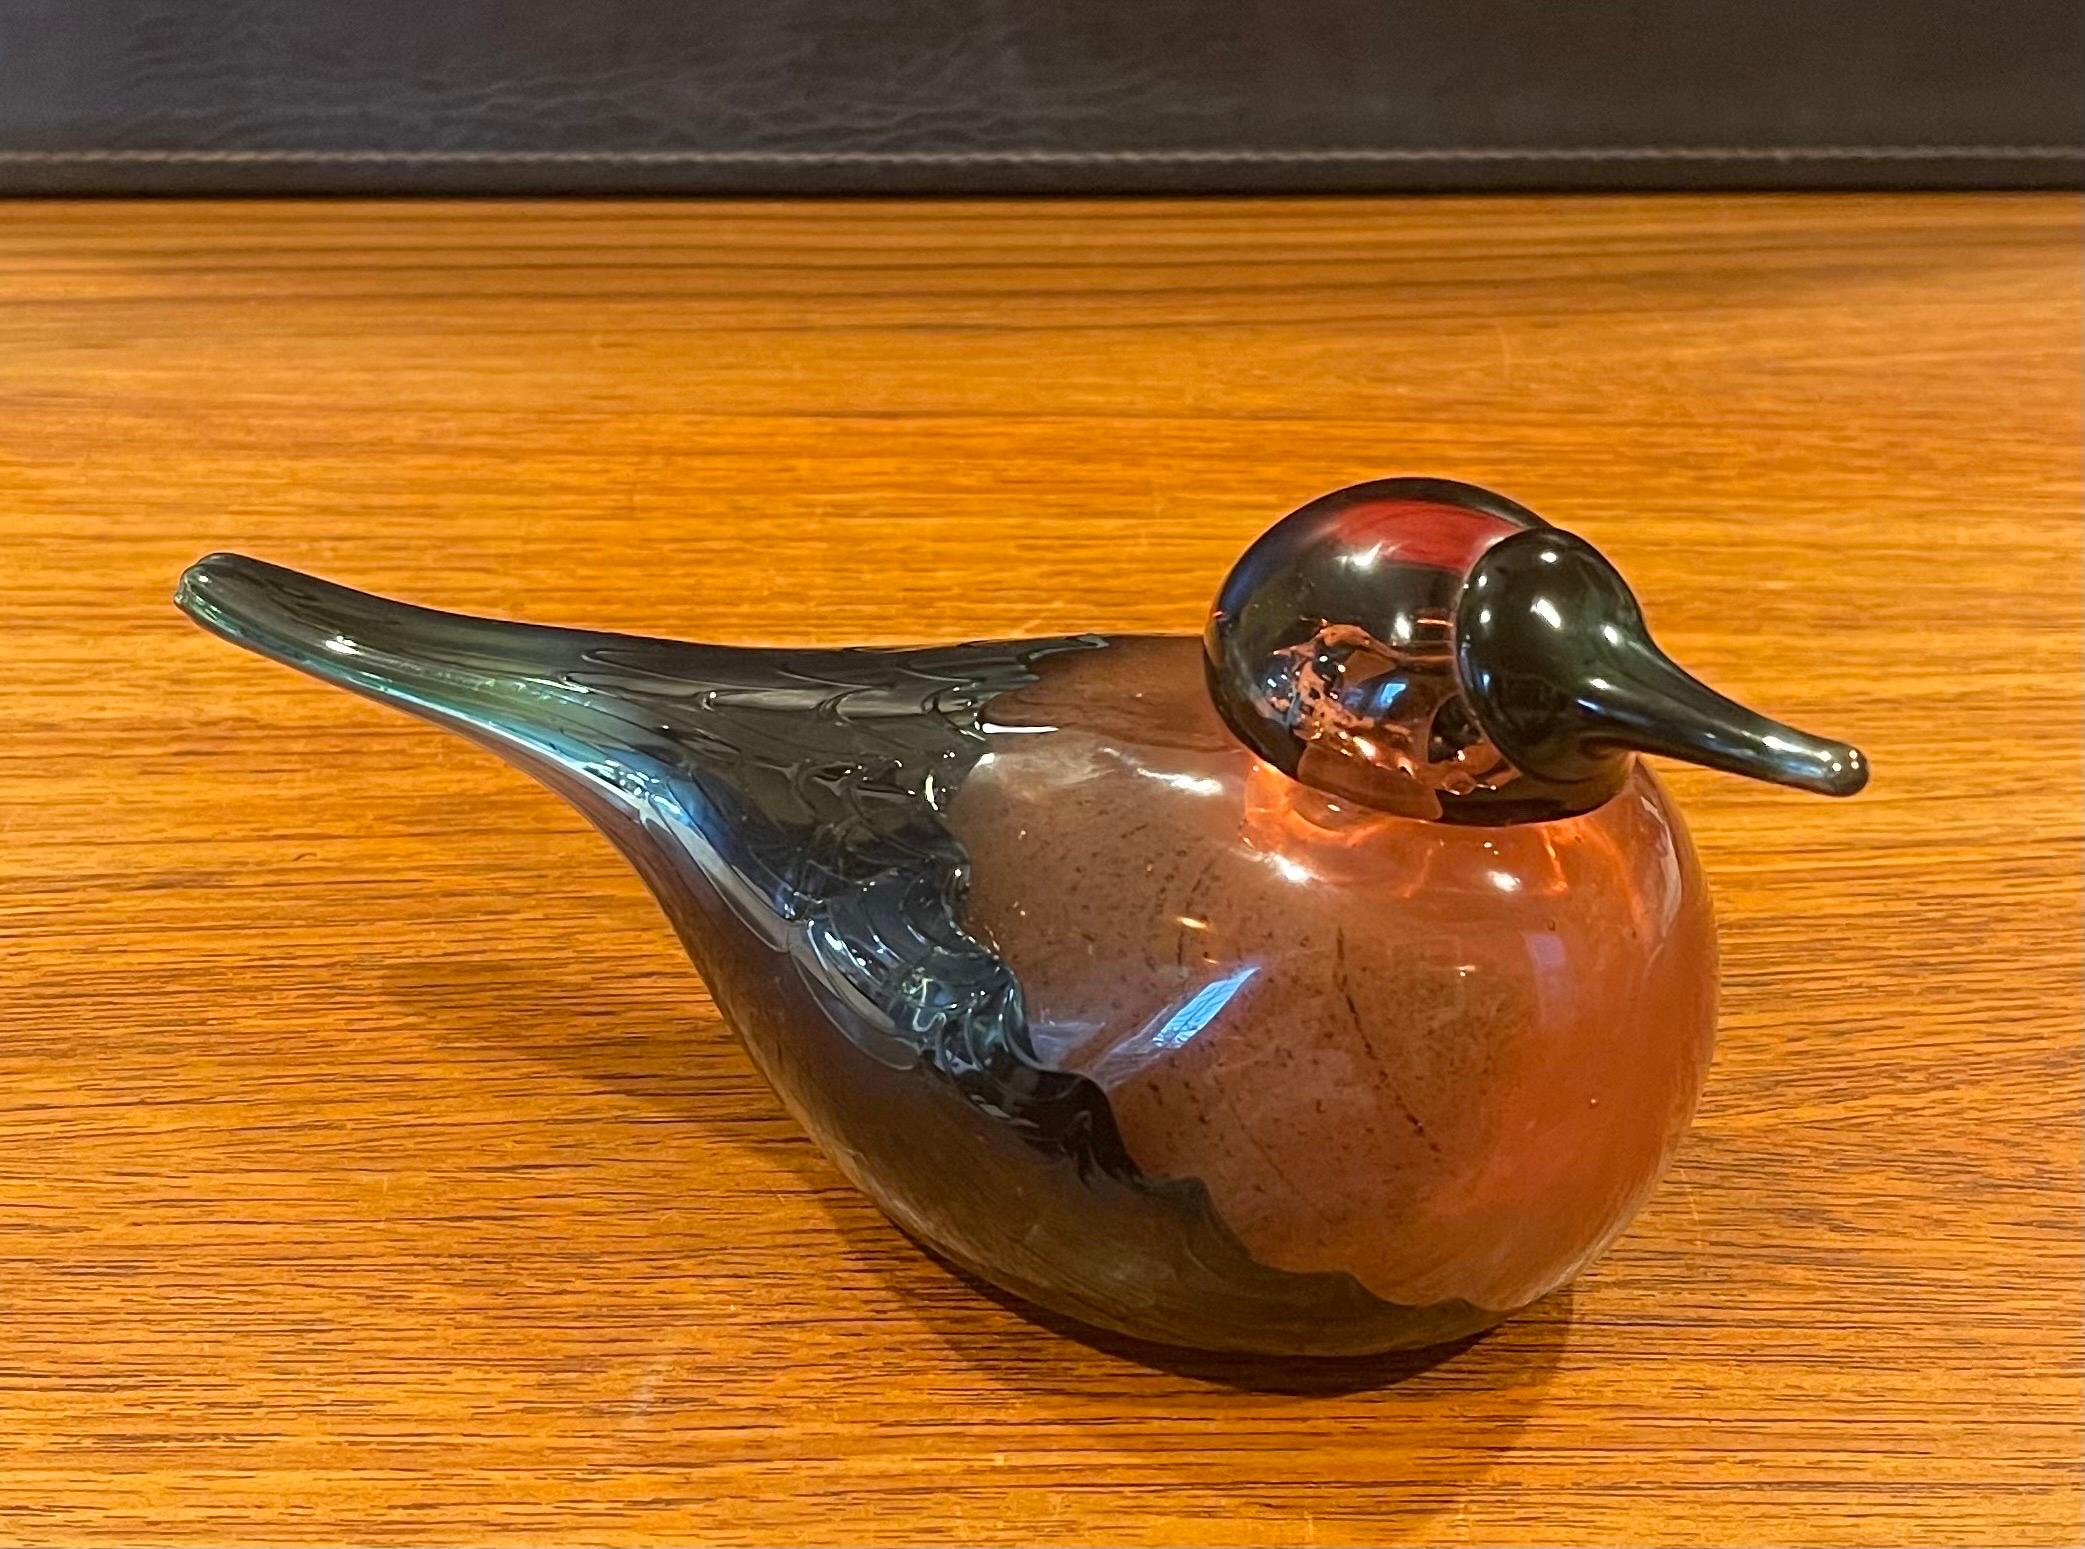 Gorgeous limited edition art glass bird sculpture by Oiva Toikka for Iittala of Finland, circa 1990s. This sculpture is mouth blown and is in great vintage condition with no chips or cracks. The piece measures 9